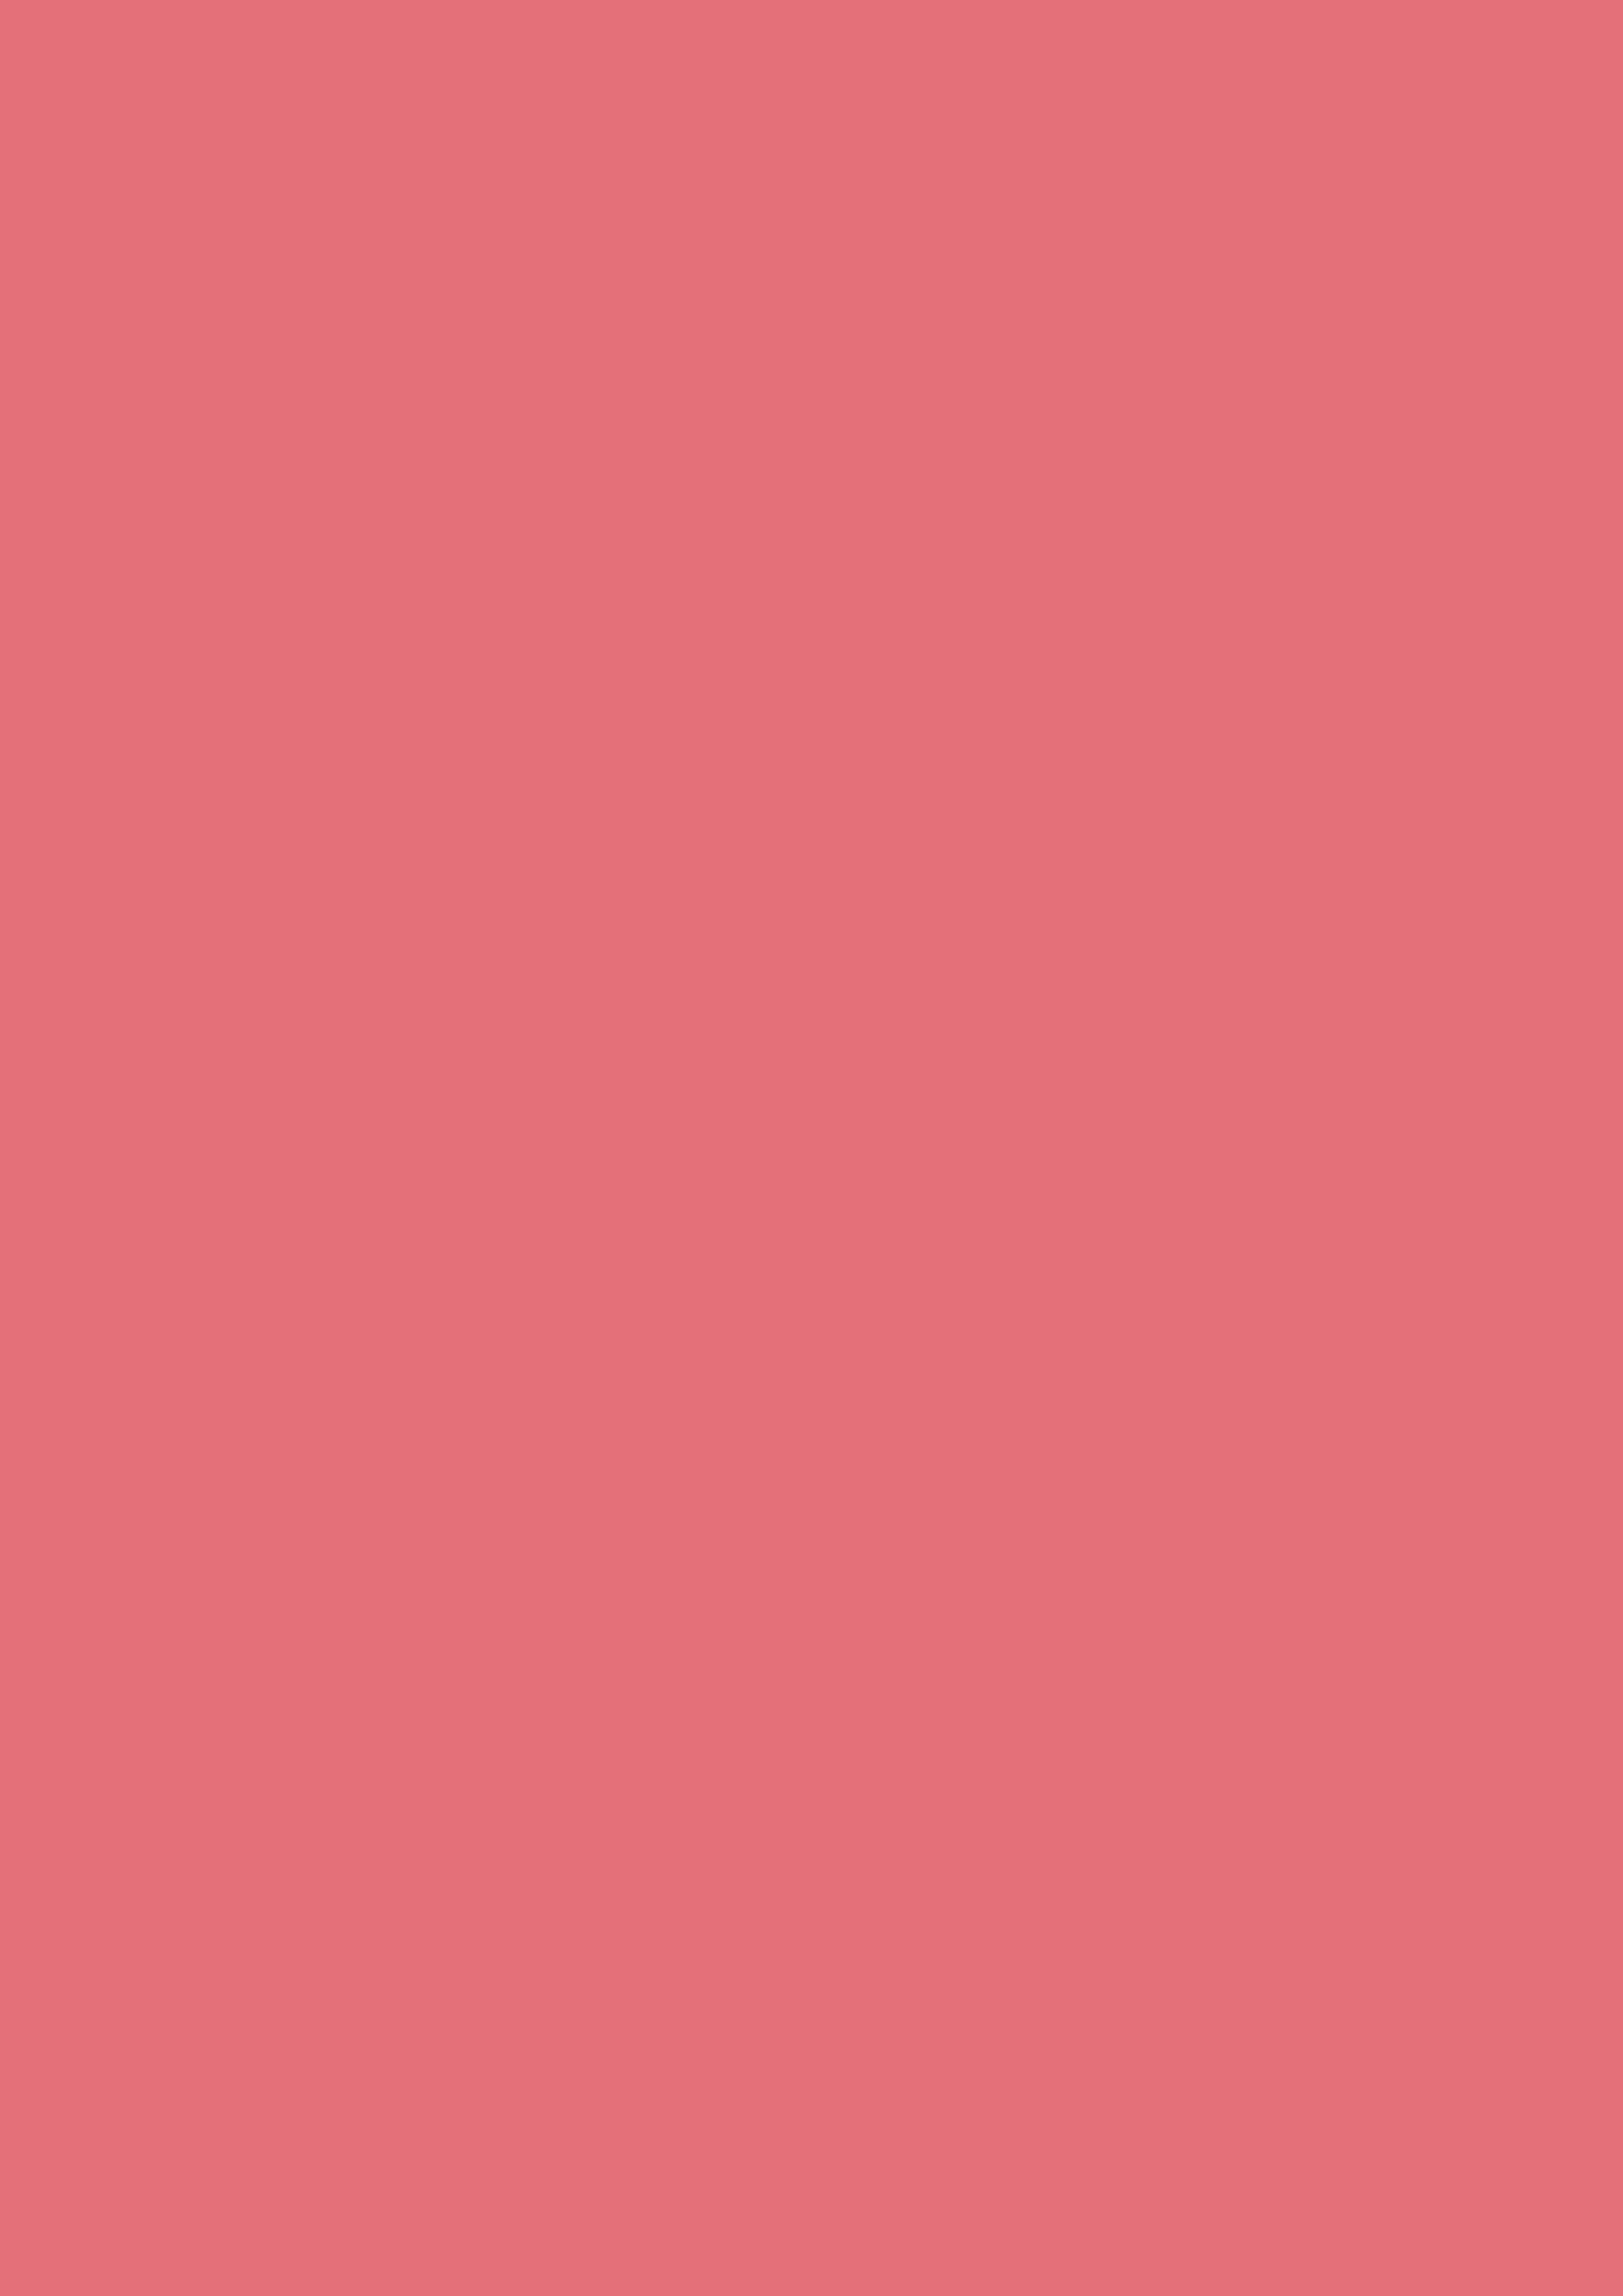 2480x3508 Tango Pink Solid Color Background